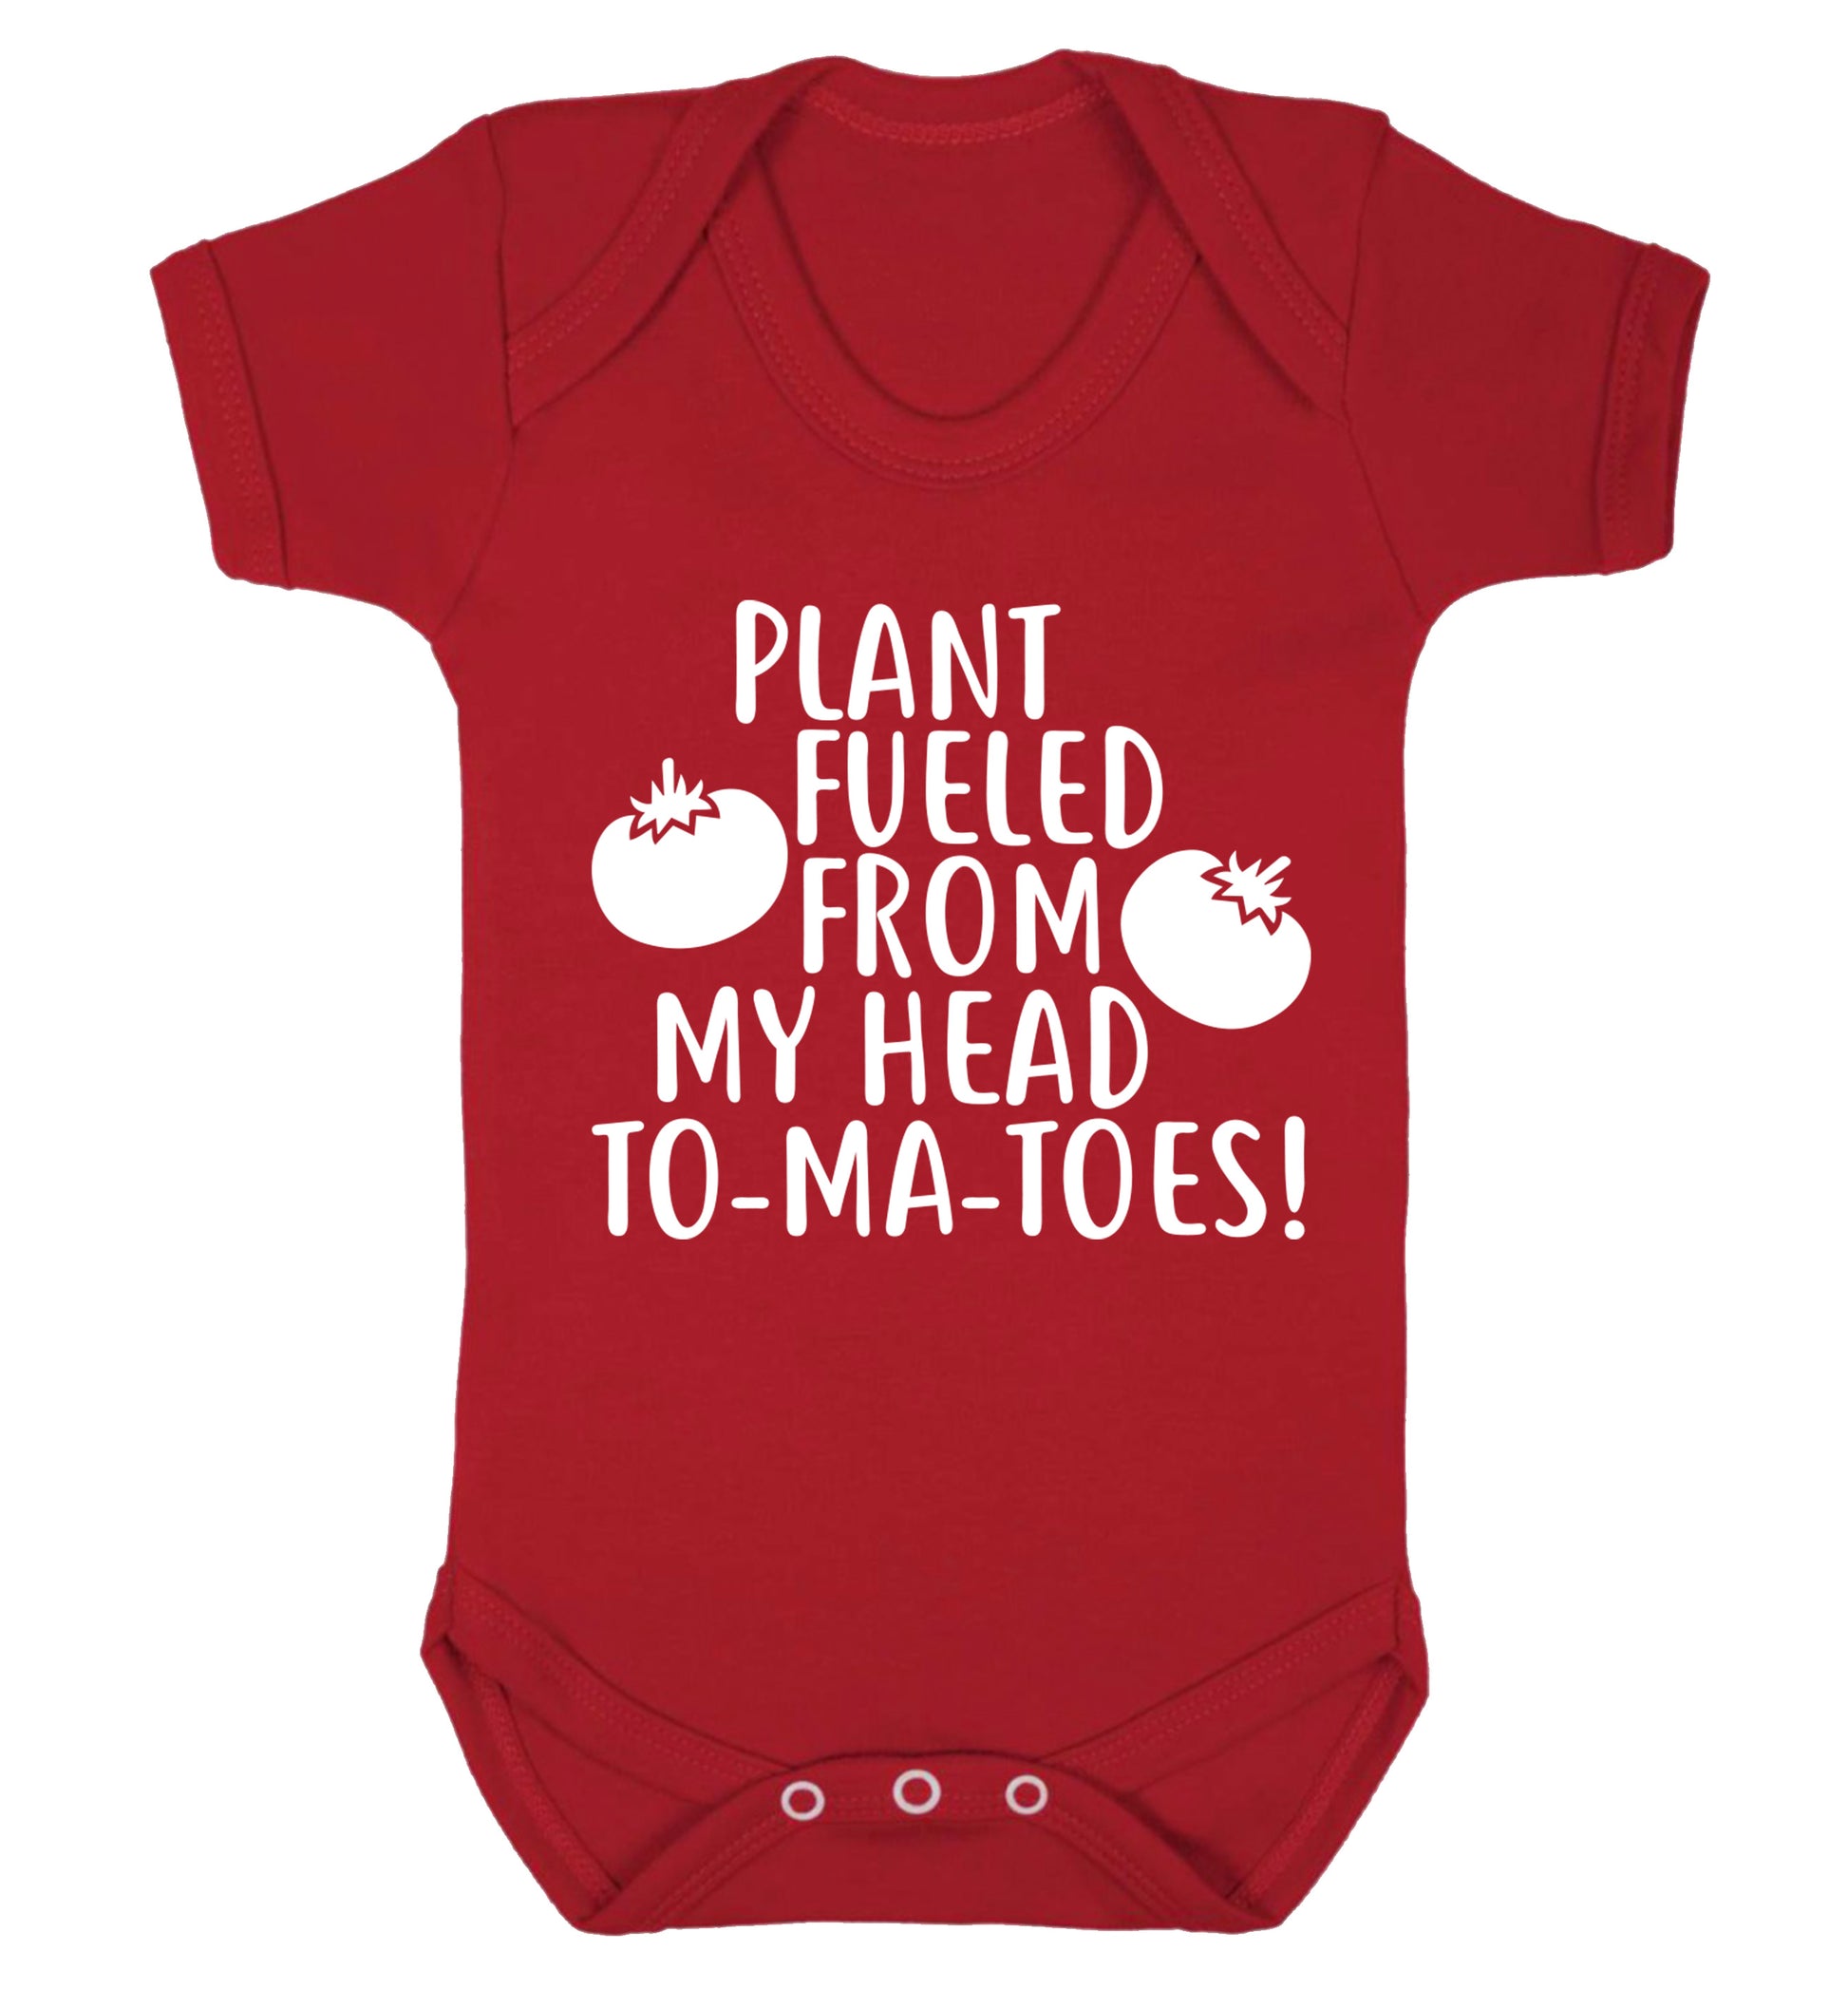 Plant fueled from my head to-ma-toes Baby Vest red 18-24 months